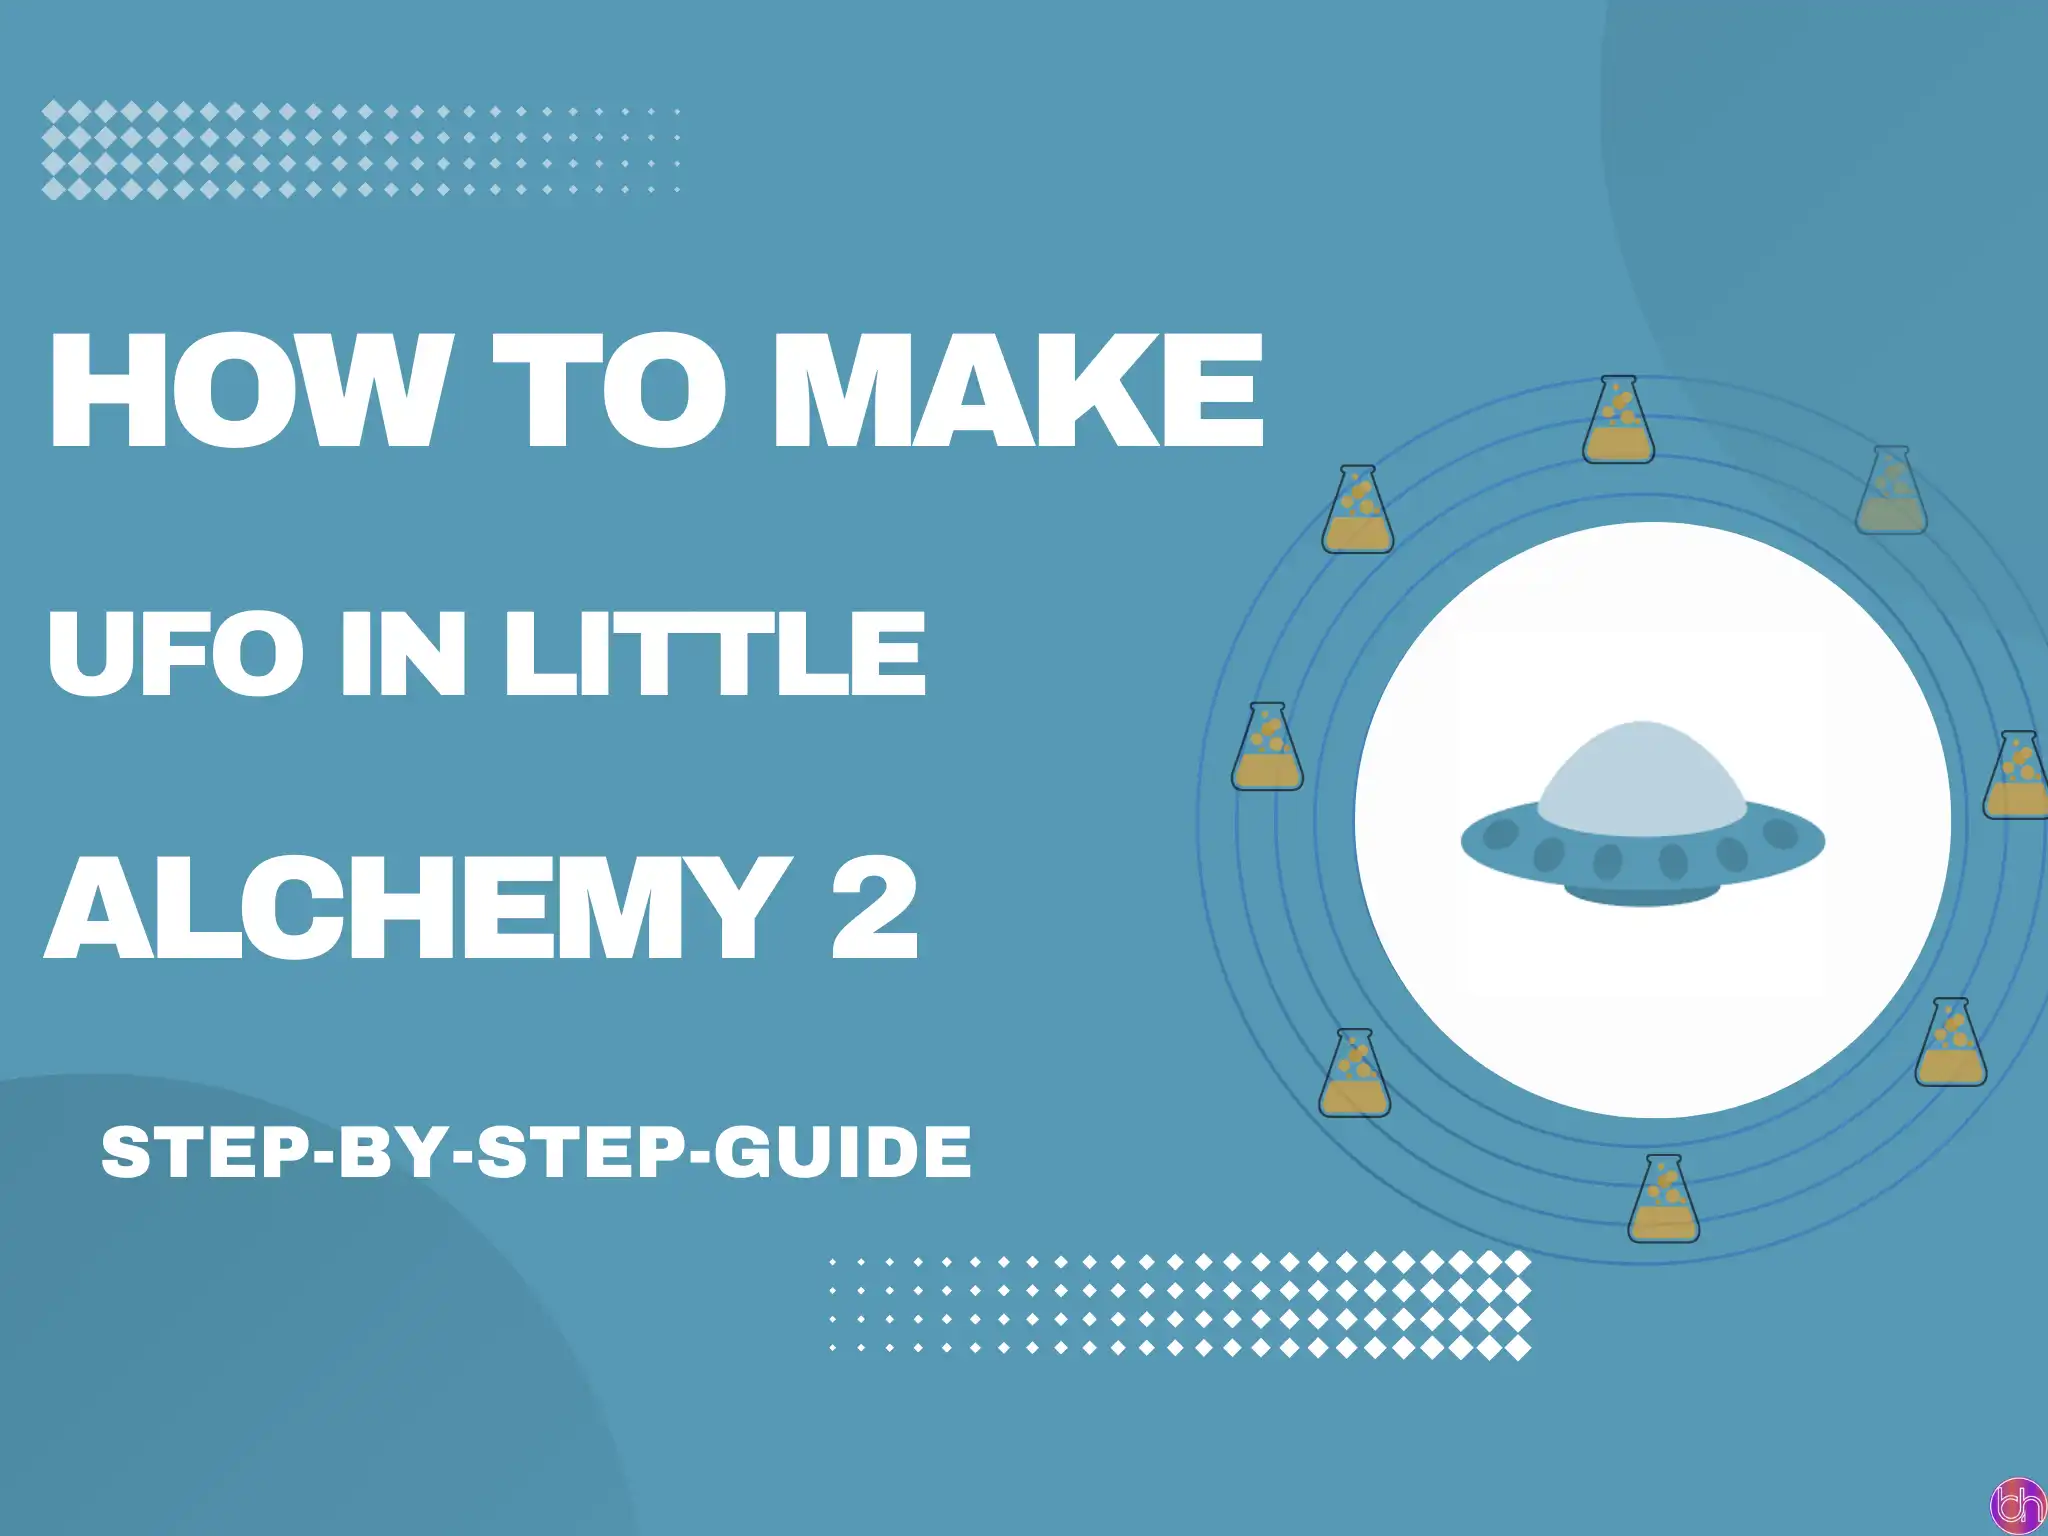 How to make Ufo in Little Alchemy 2